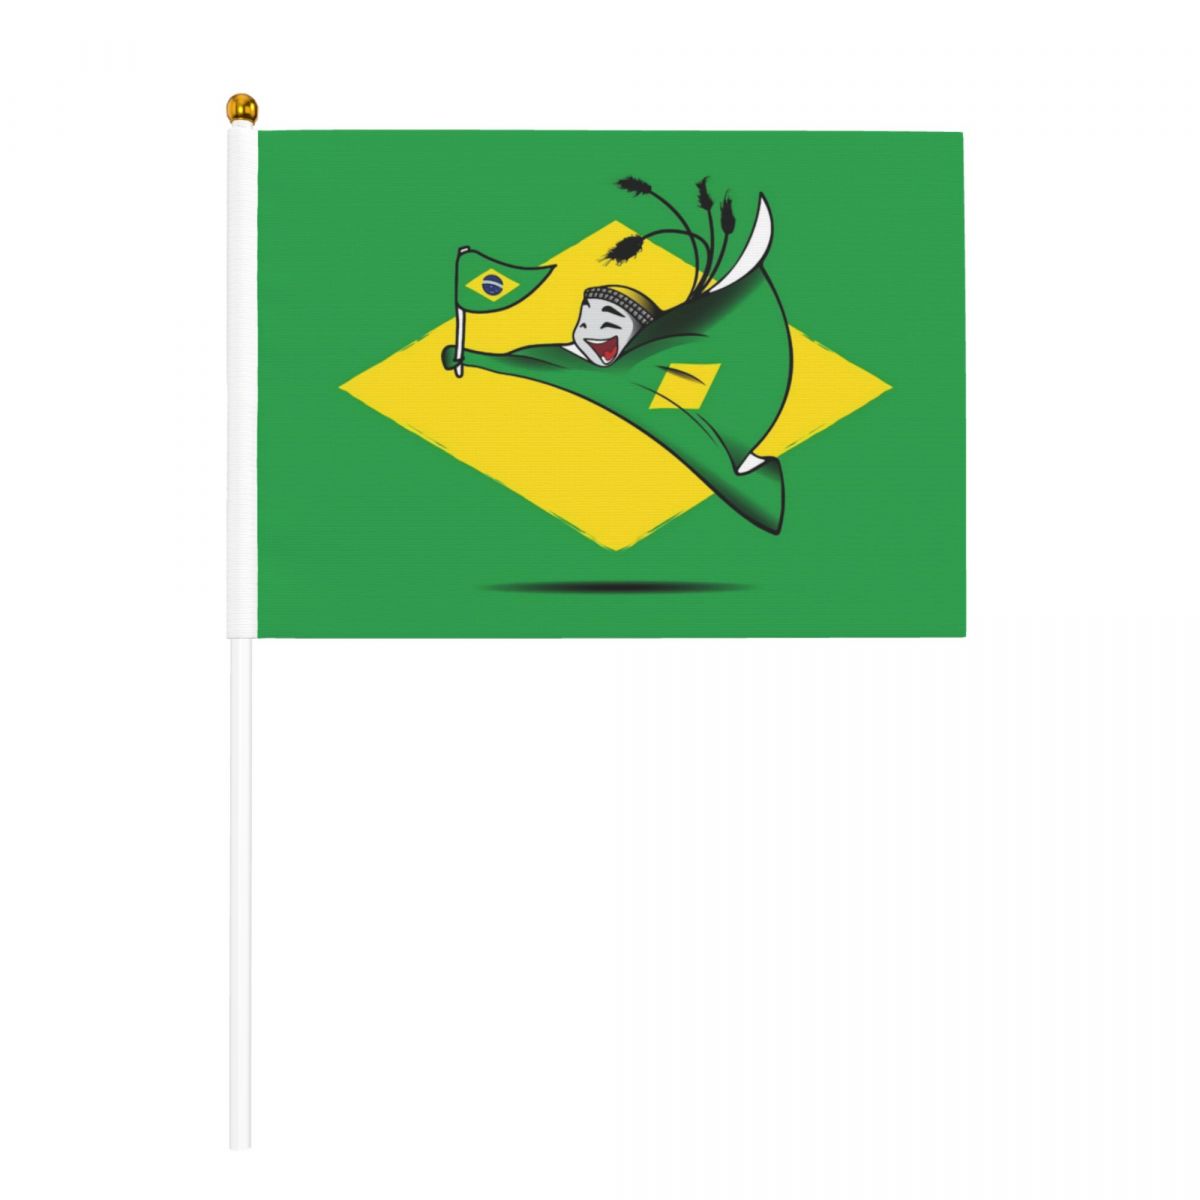 Brazil World Cup 2022 Mascot Hand Held Small Miniature Flags on Stick